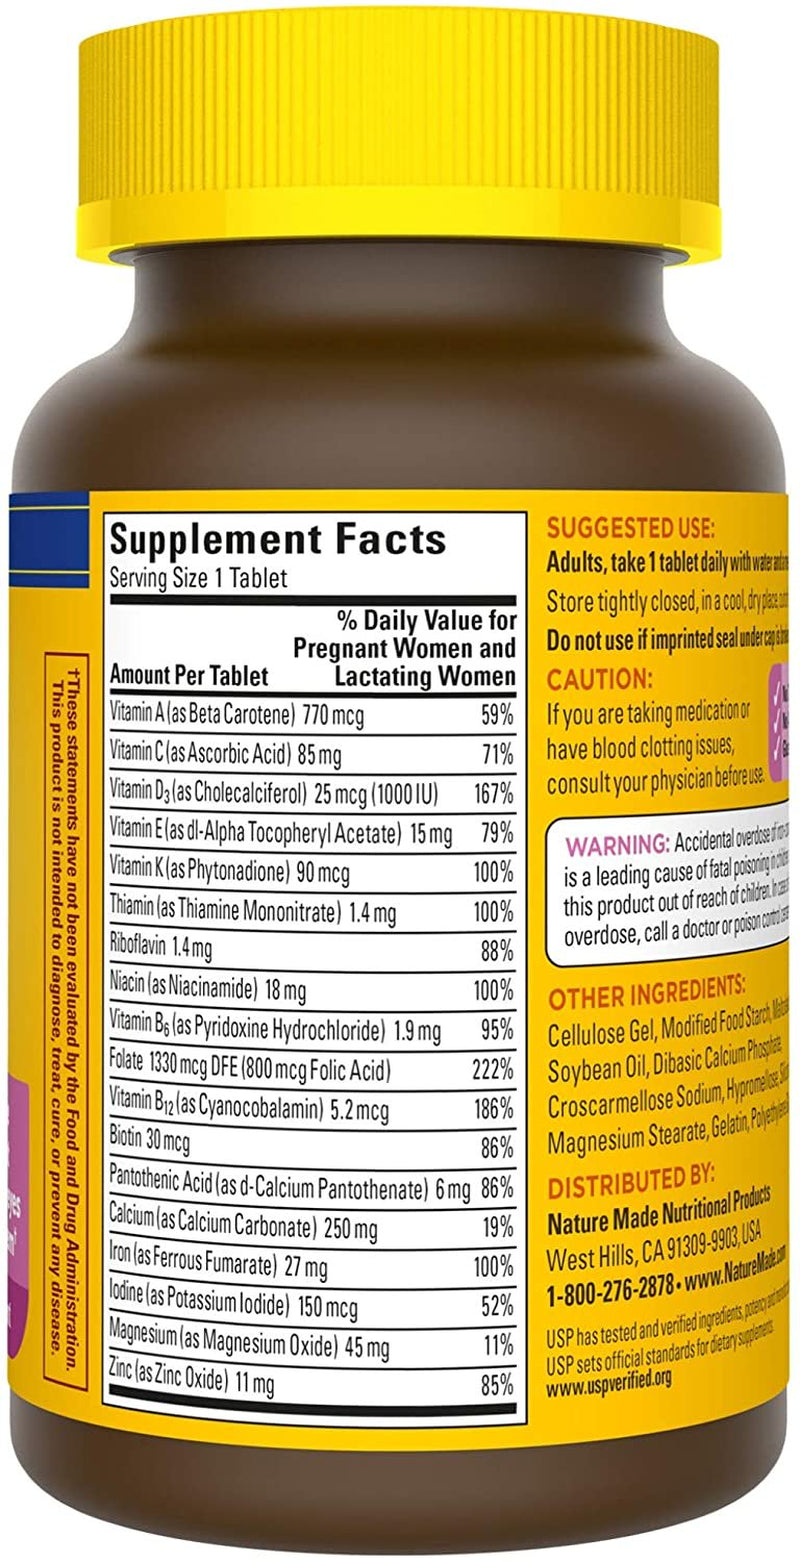 Nature Made Prenatal Multi Dietary Supplement , 90 Tablets Ea (Pack of 3)